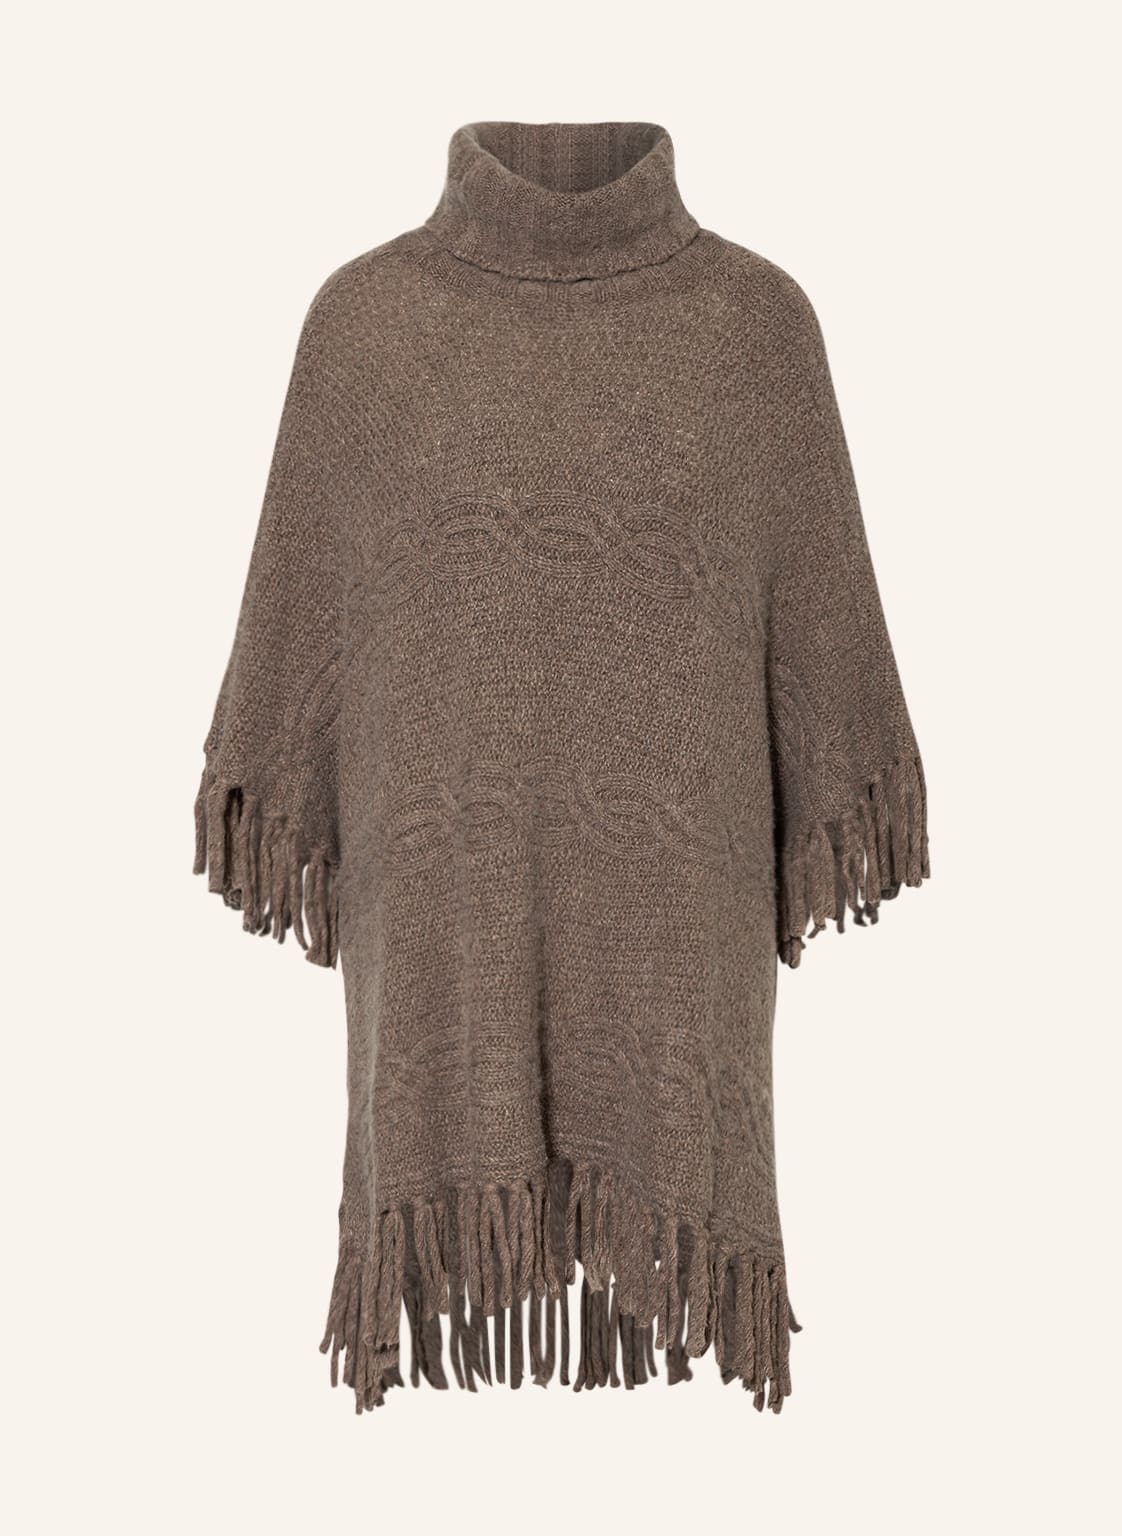 Image of Darling Harbour Poncho beige